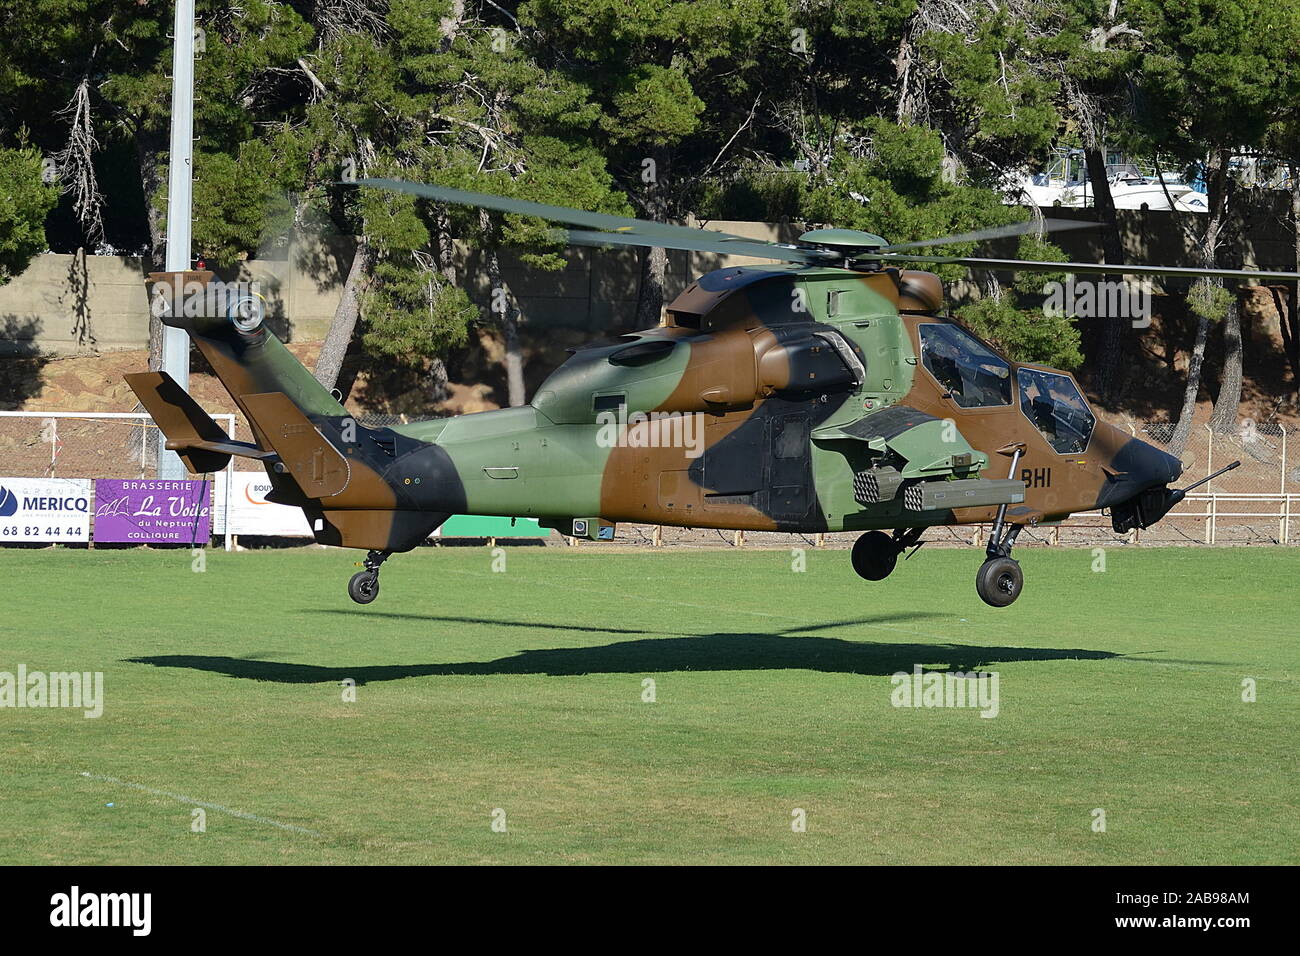 FRENCH ARMY EUROCOPTER TIGRE (TIGER) ASSAULT HELICOPTER.  SAME TYPE AS CRASHED IN MALI 26 NOVEMBER 2019. Stock Photo